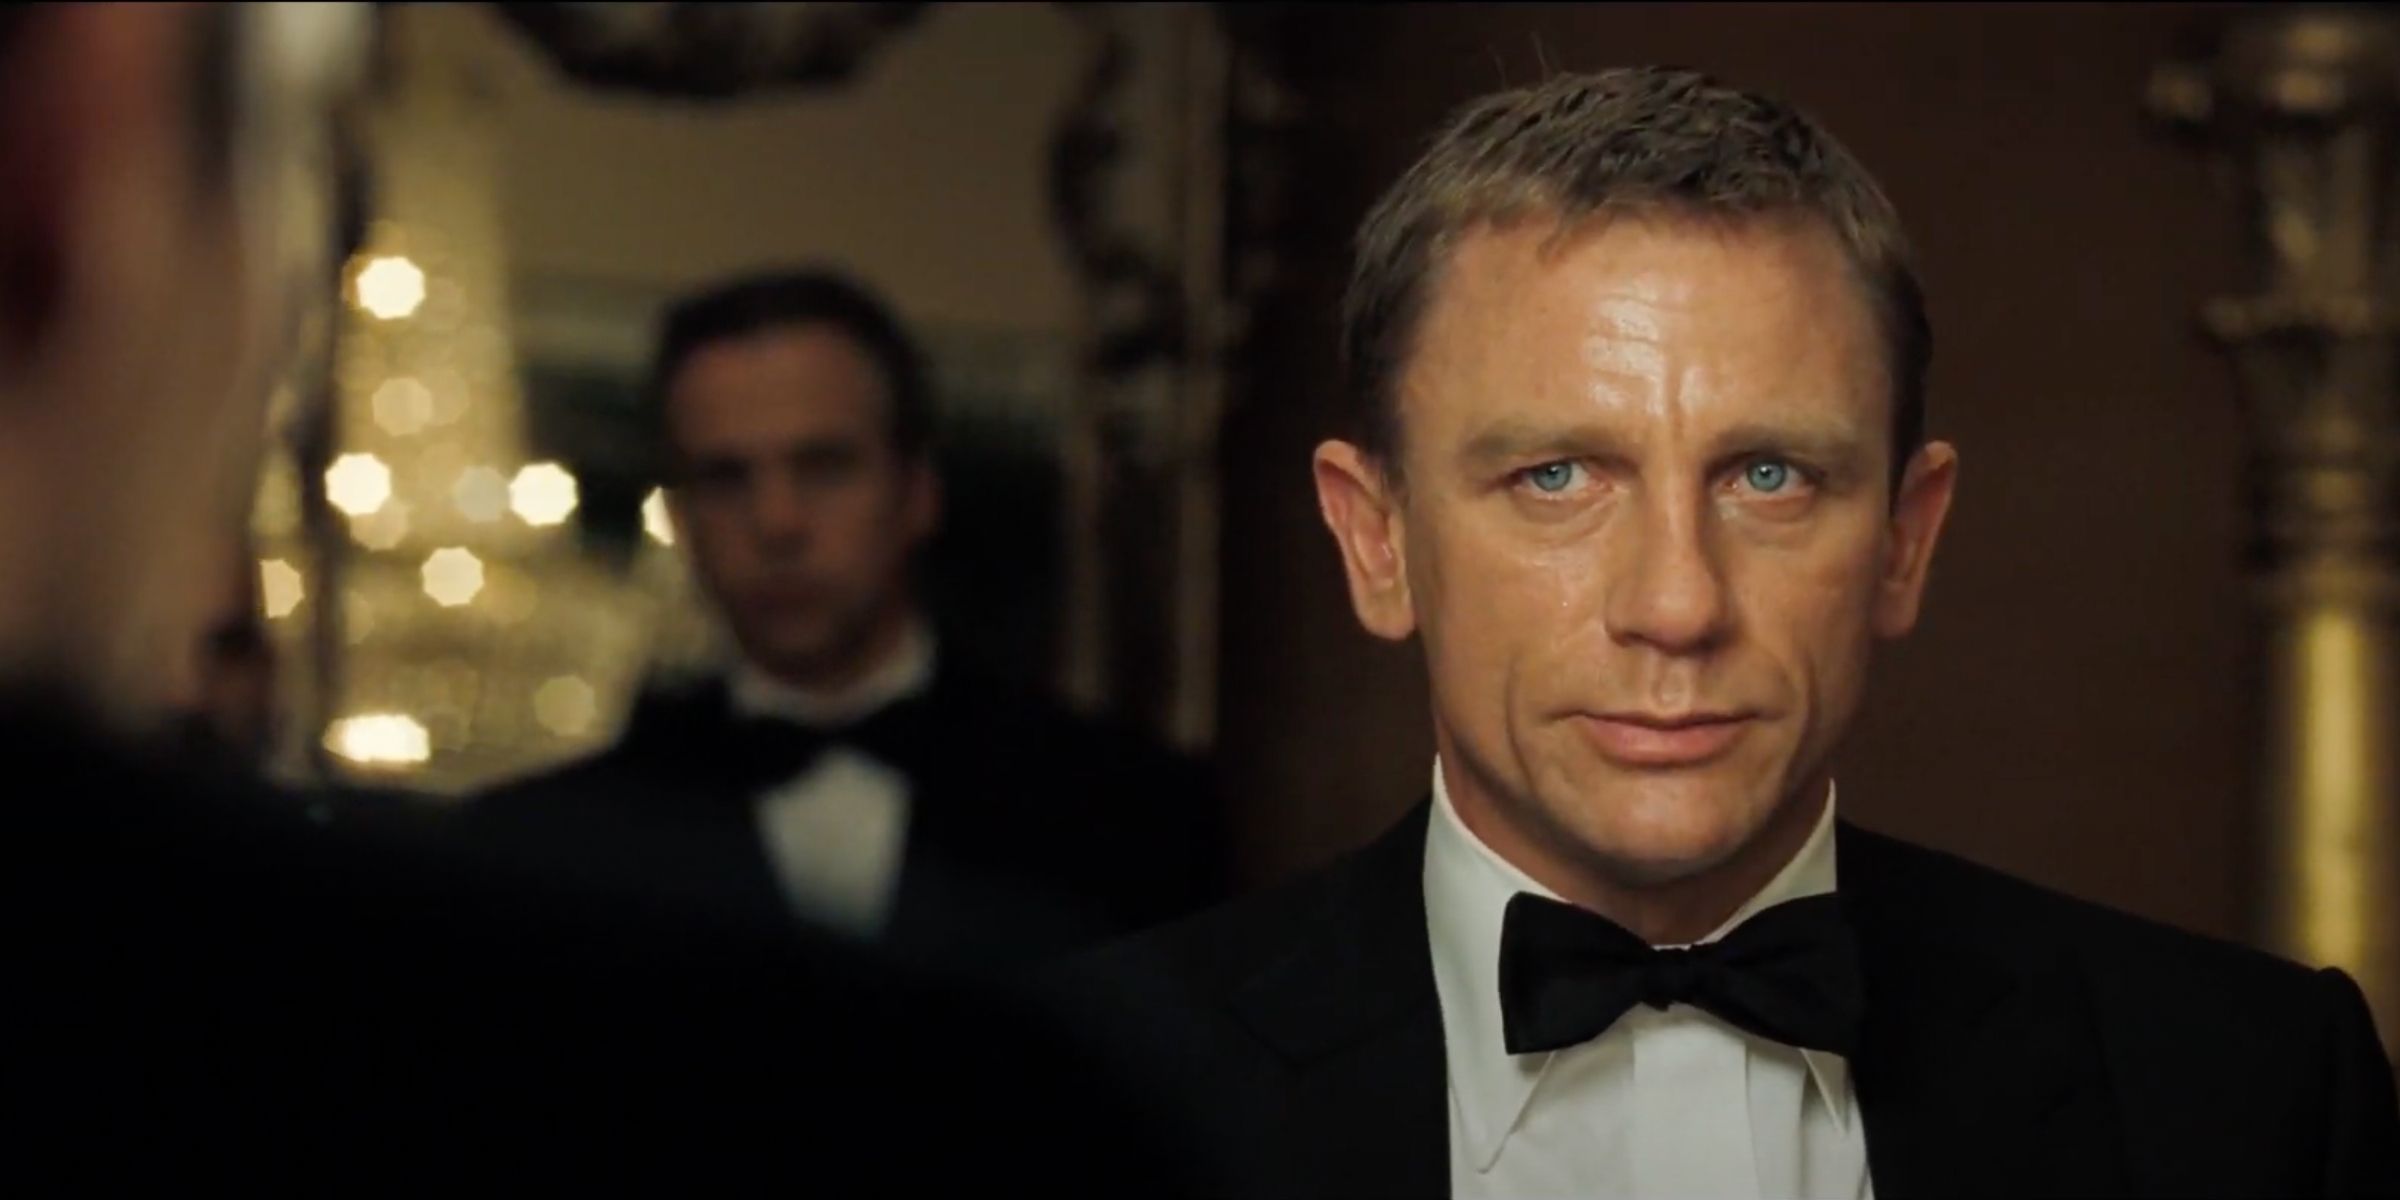 James Bond confronts Le Chiffre at the poker table in 'Casino Royale'.